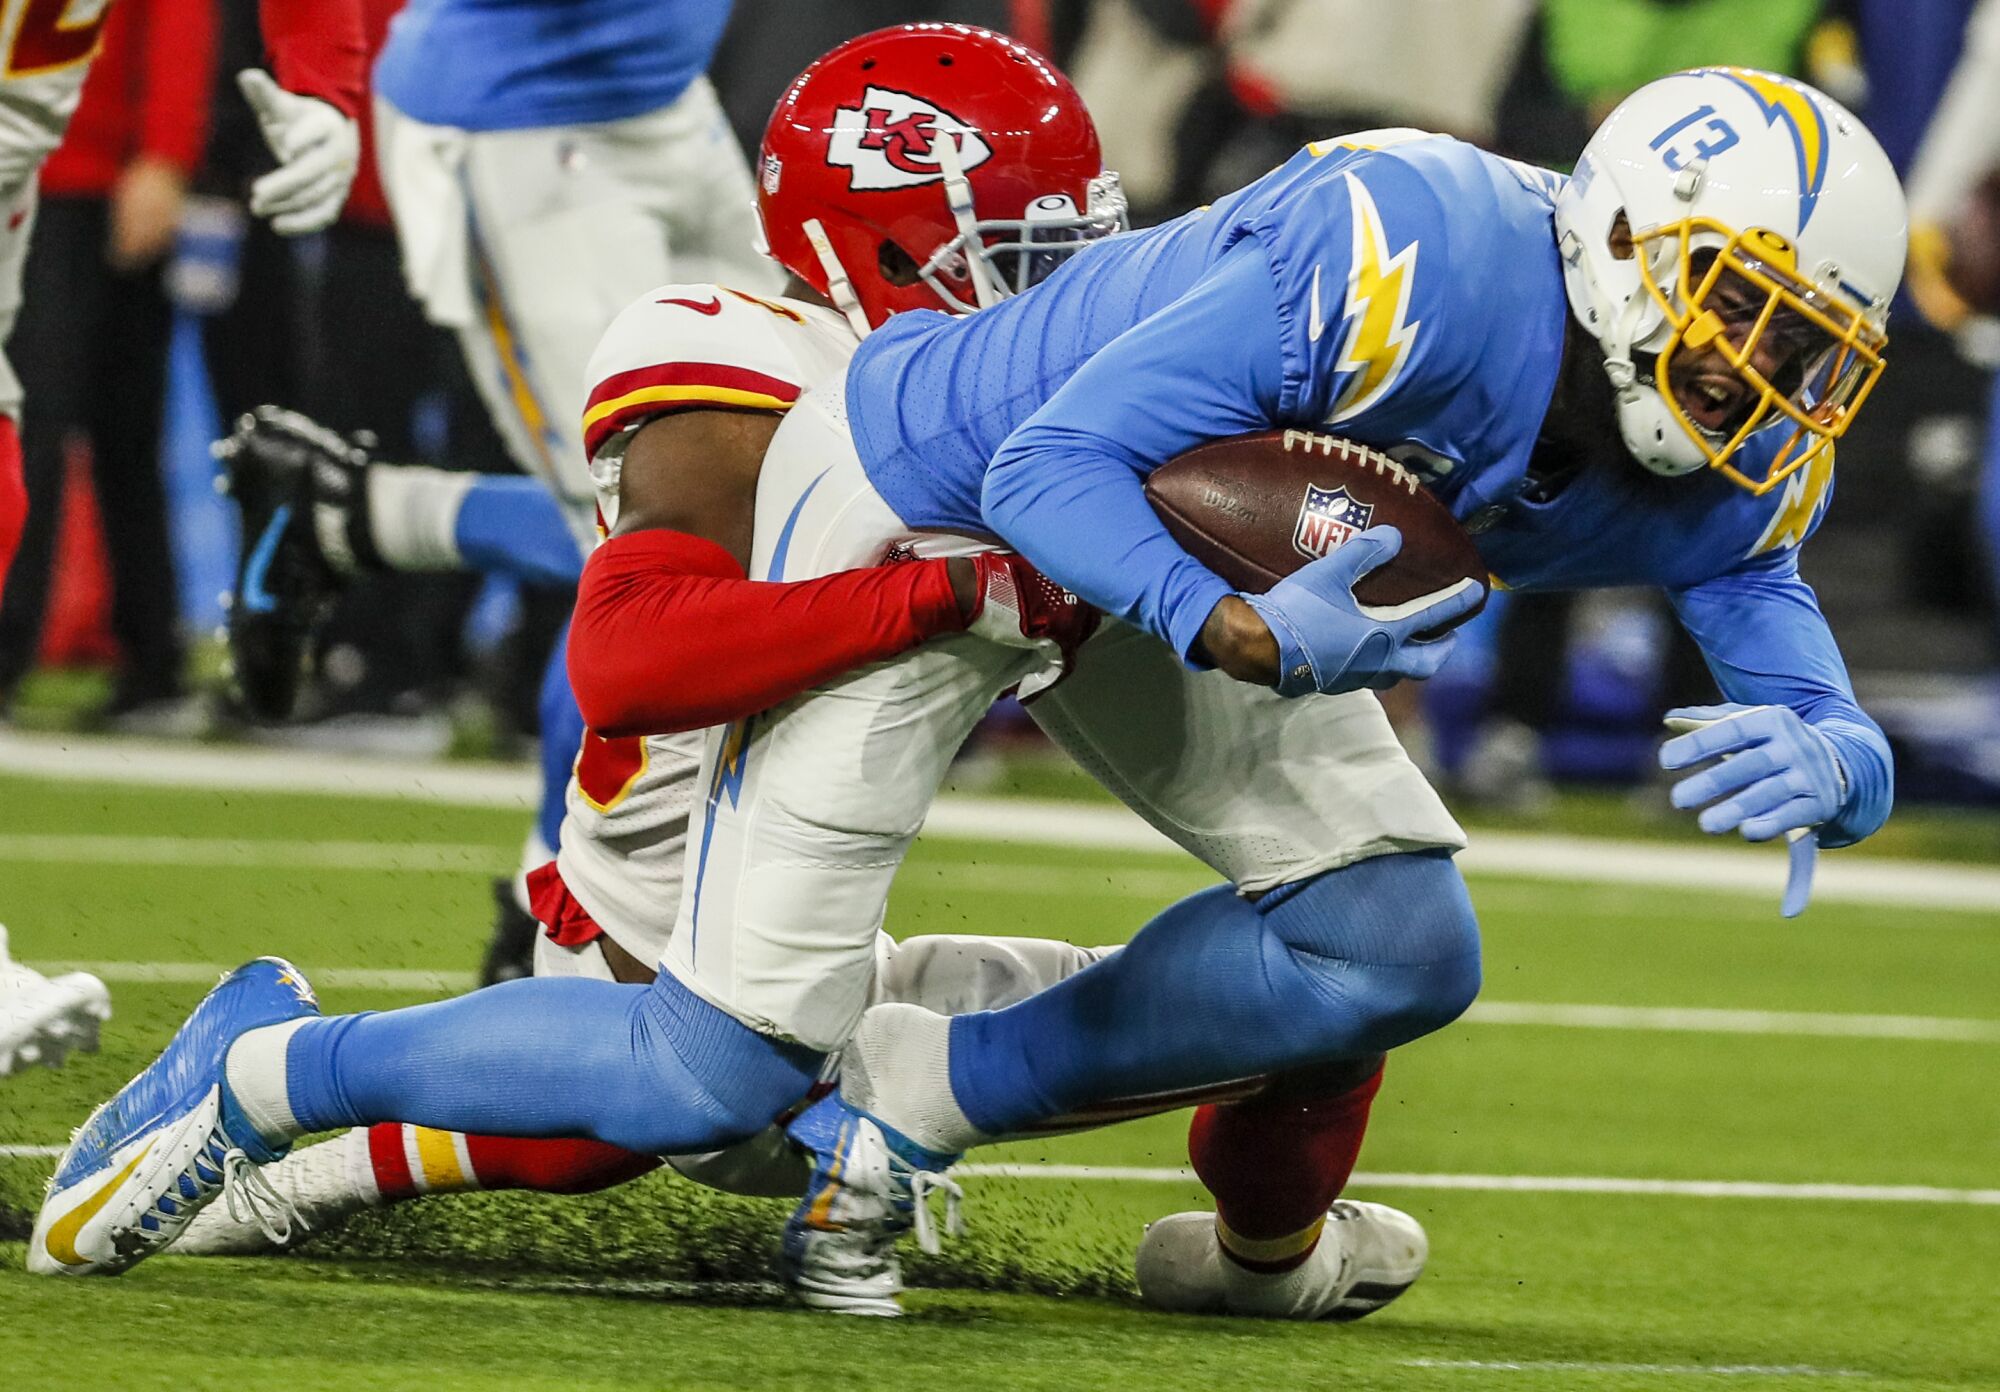 Chargers wide receiver Keenan Allen has his shoe pulled off as he is tackled by Kansas City Chiefs cornerback Deandre Baker.